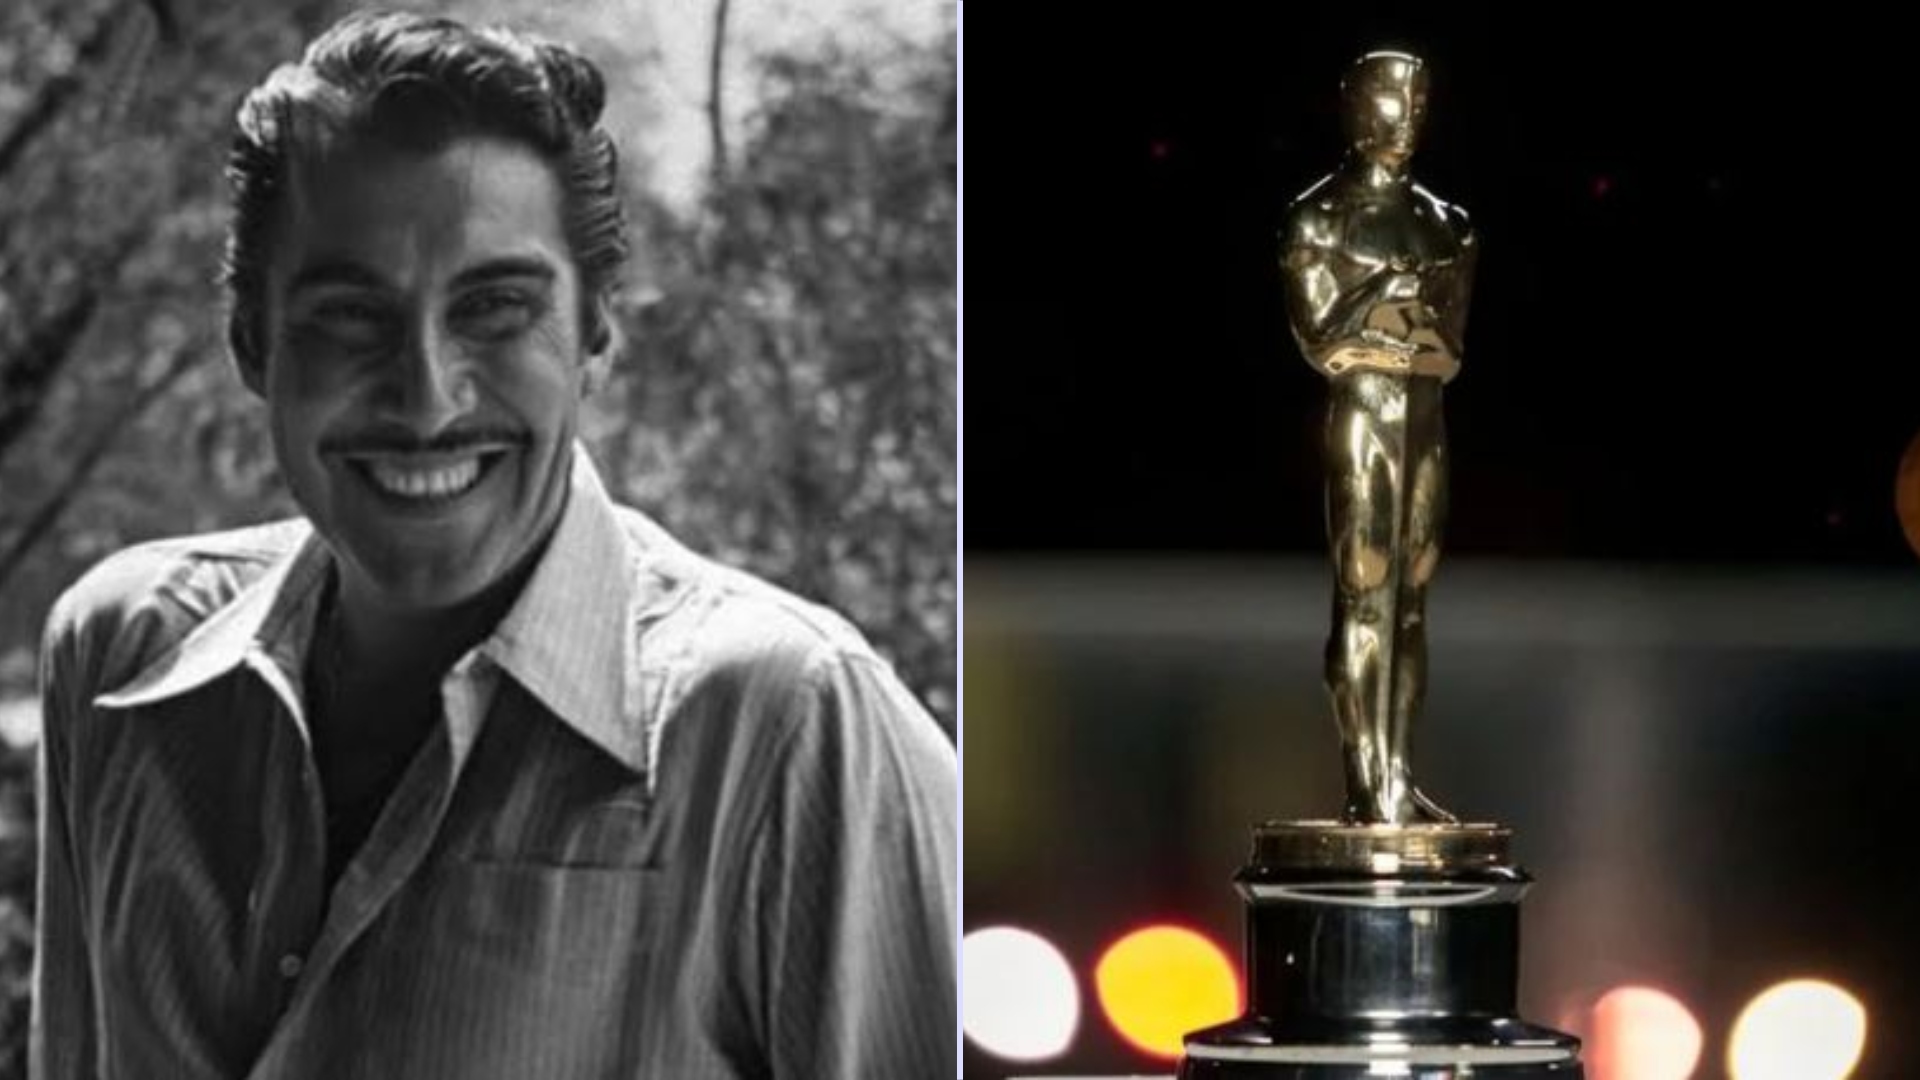 This Mexican actor claimed he modelled for the famed Oscar statuette